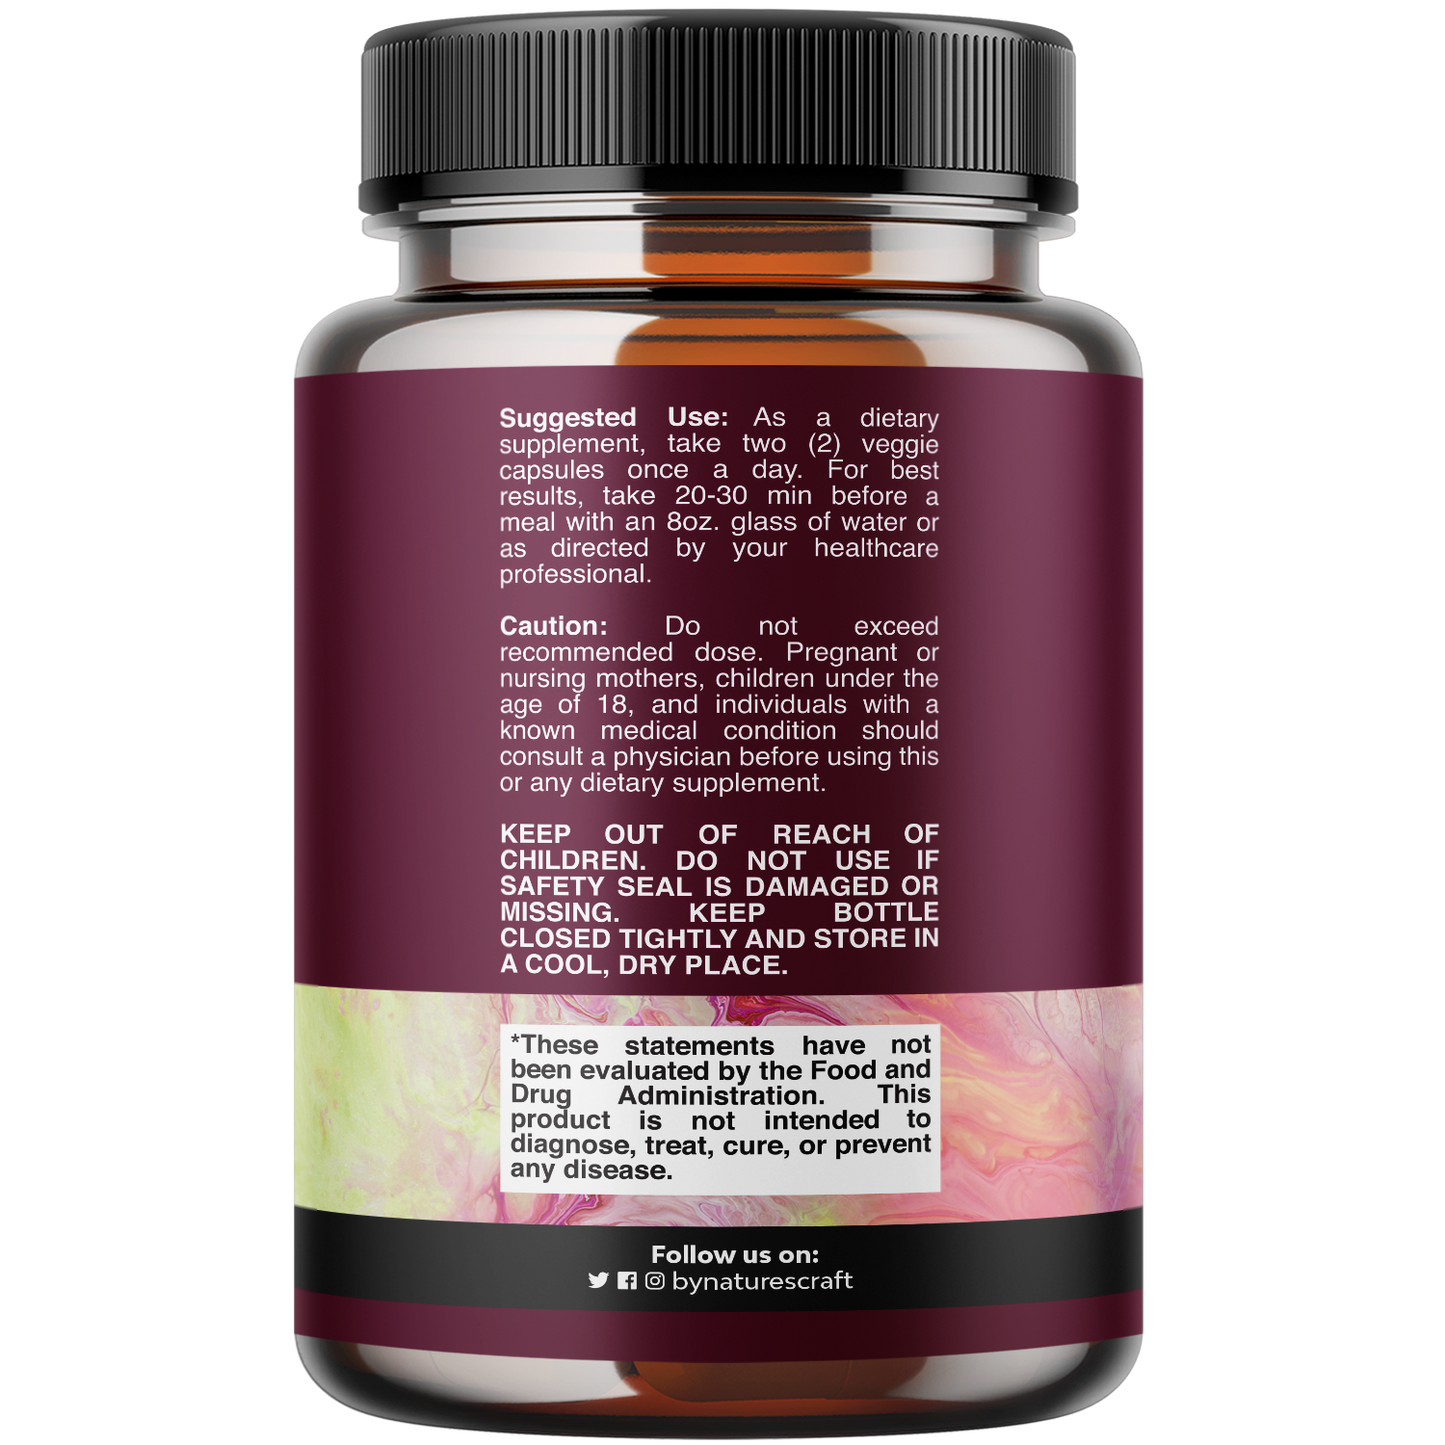 Urinary Tract Support - 90 Capsules - Nature's Craft